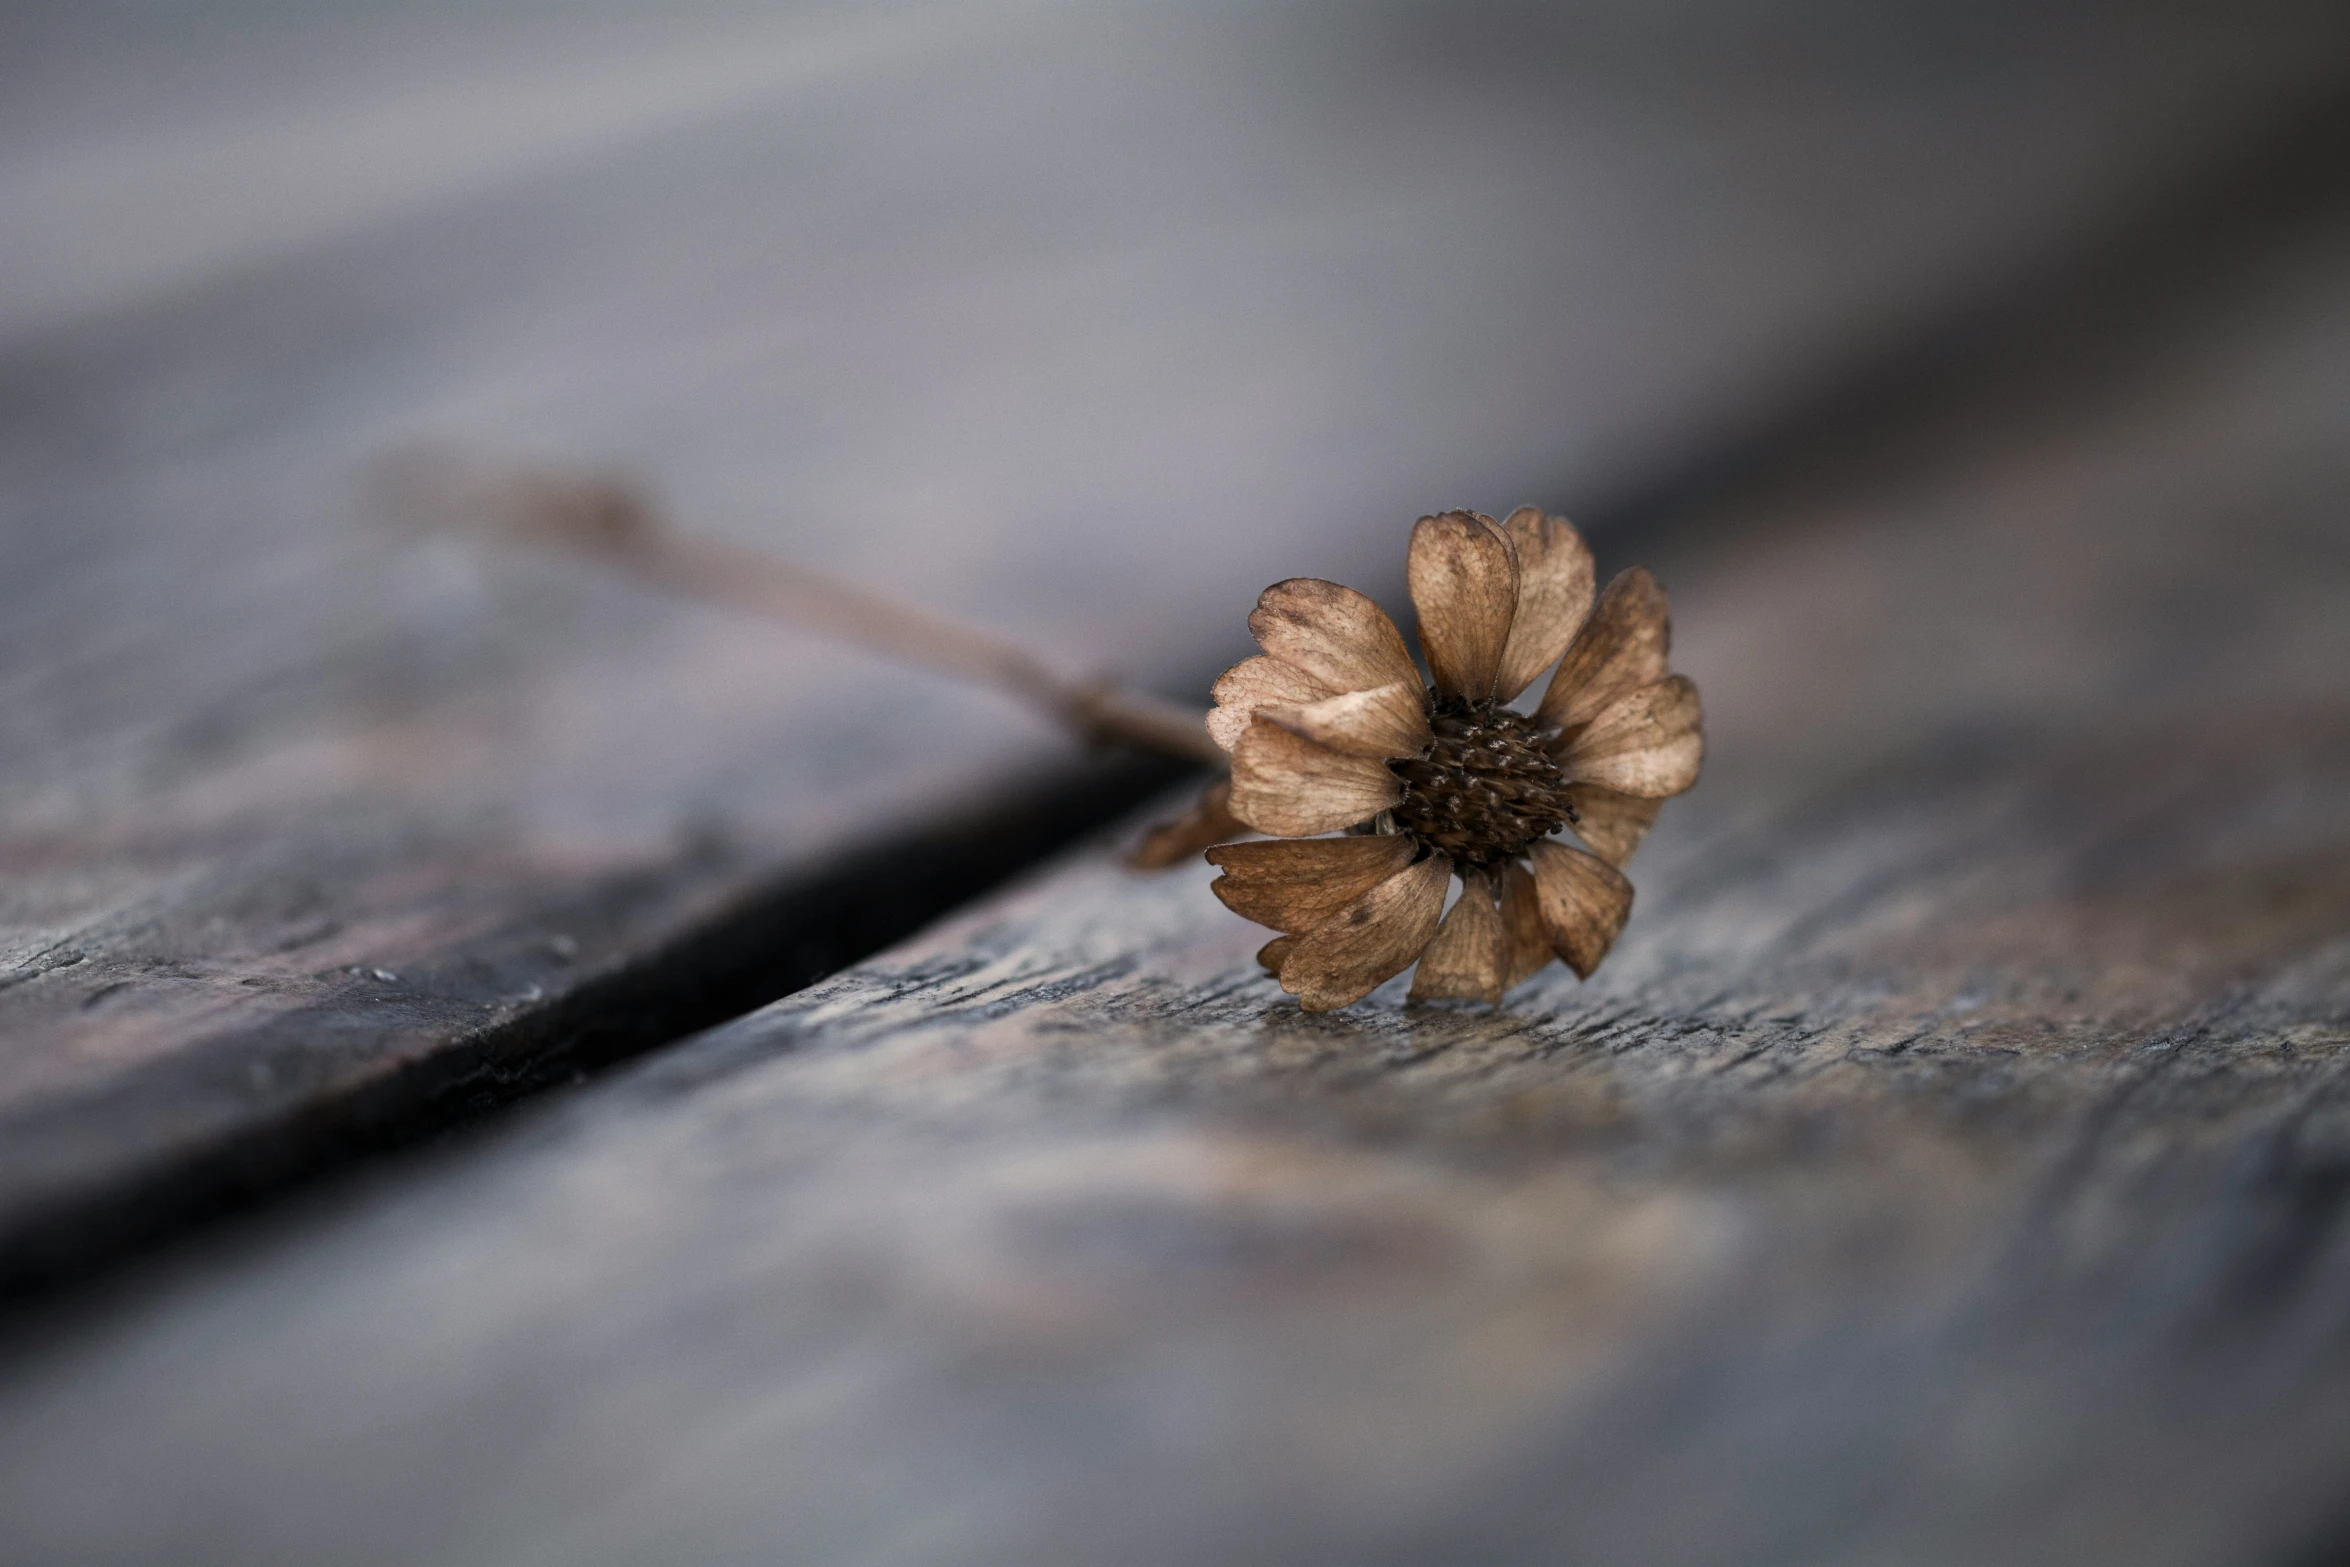 the flower is resting on the wooden surface